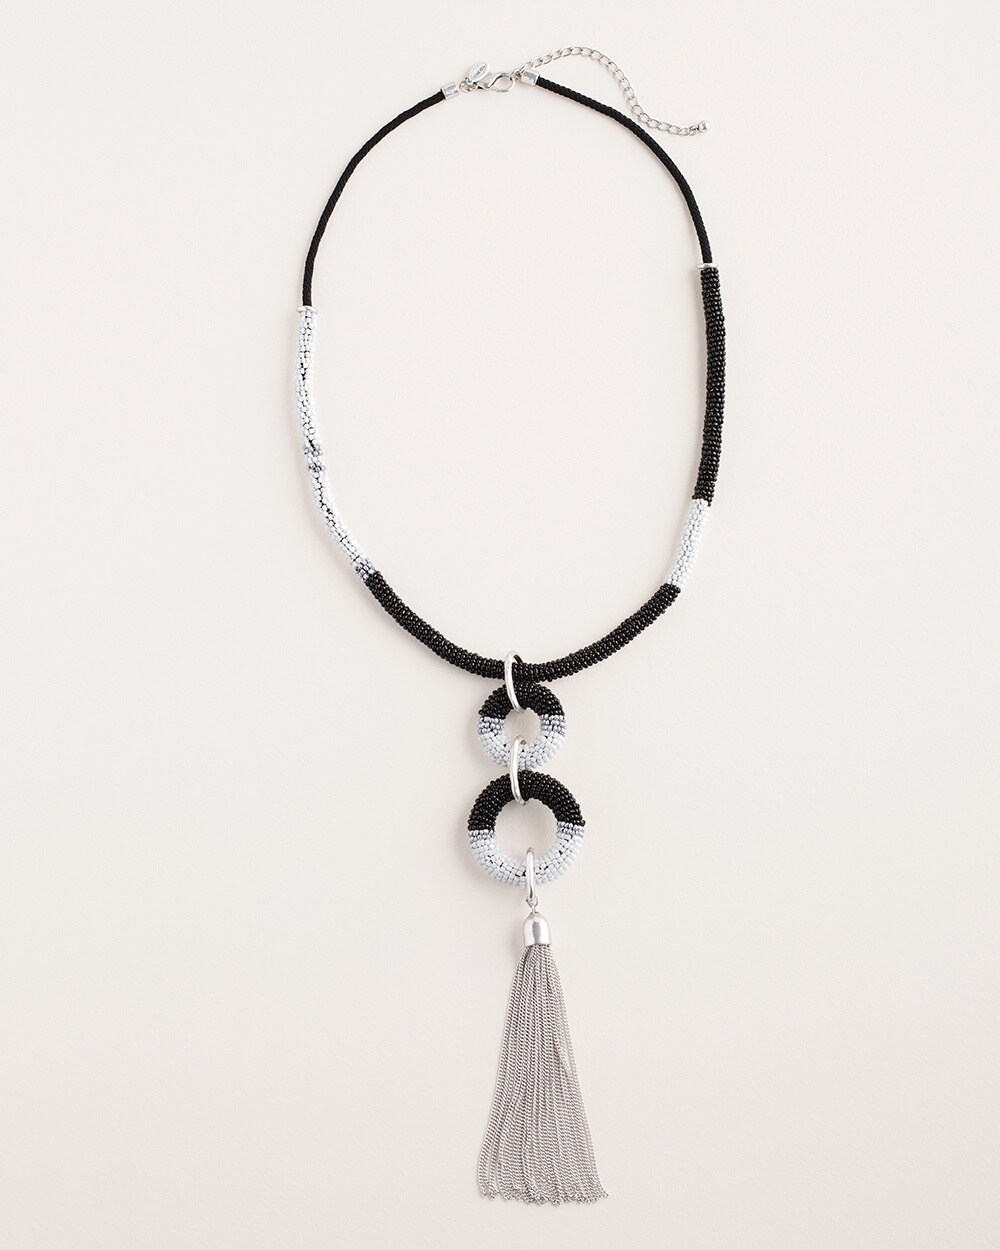 Black and White Seed Bead Pendant Necklace